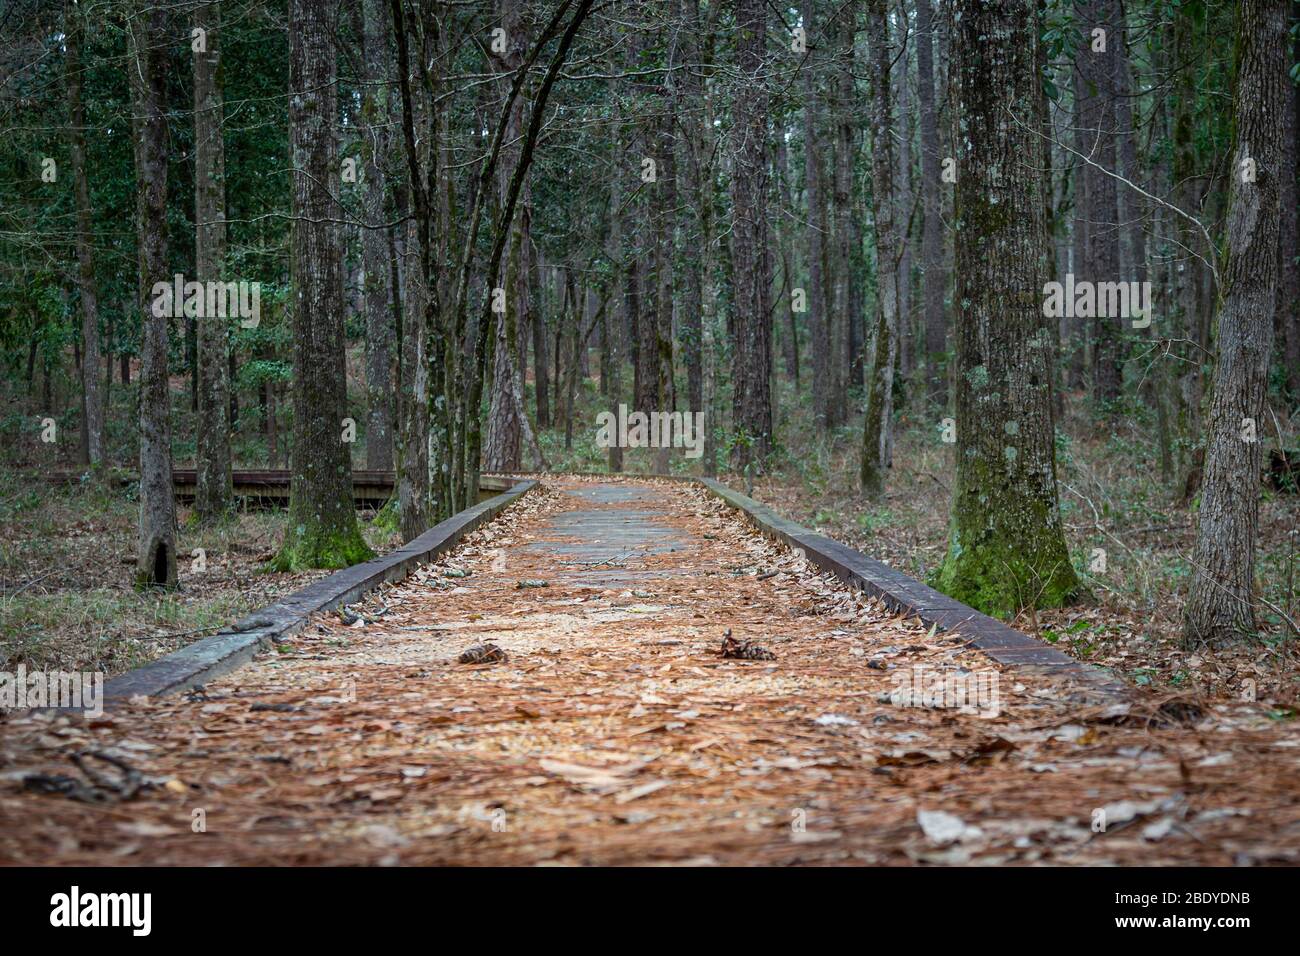 Wooden boardwalk leading into forest Stock Photo